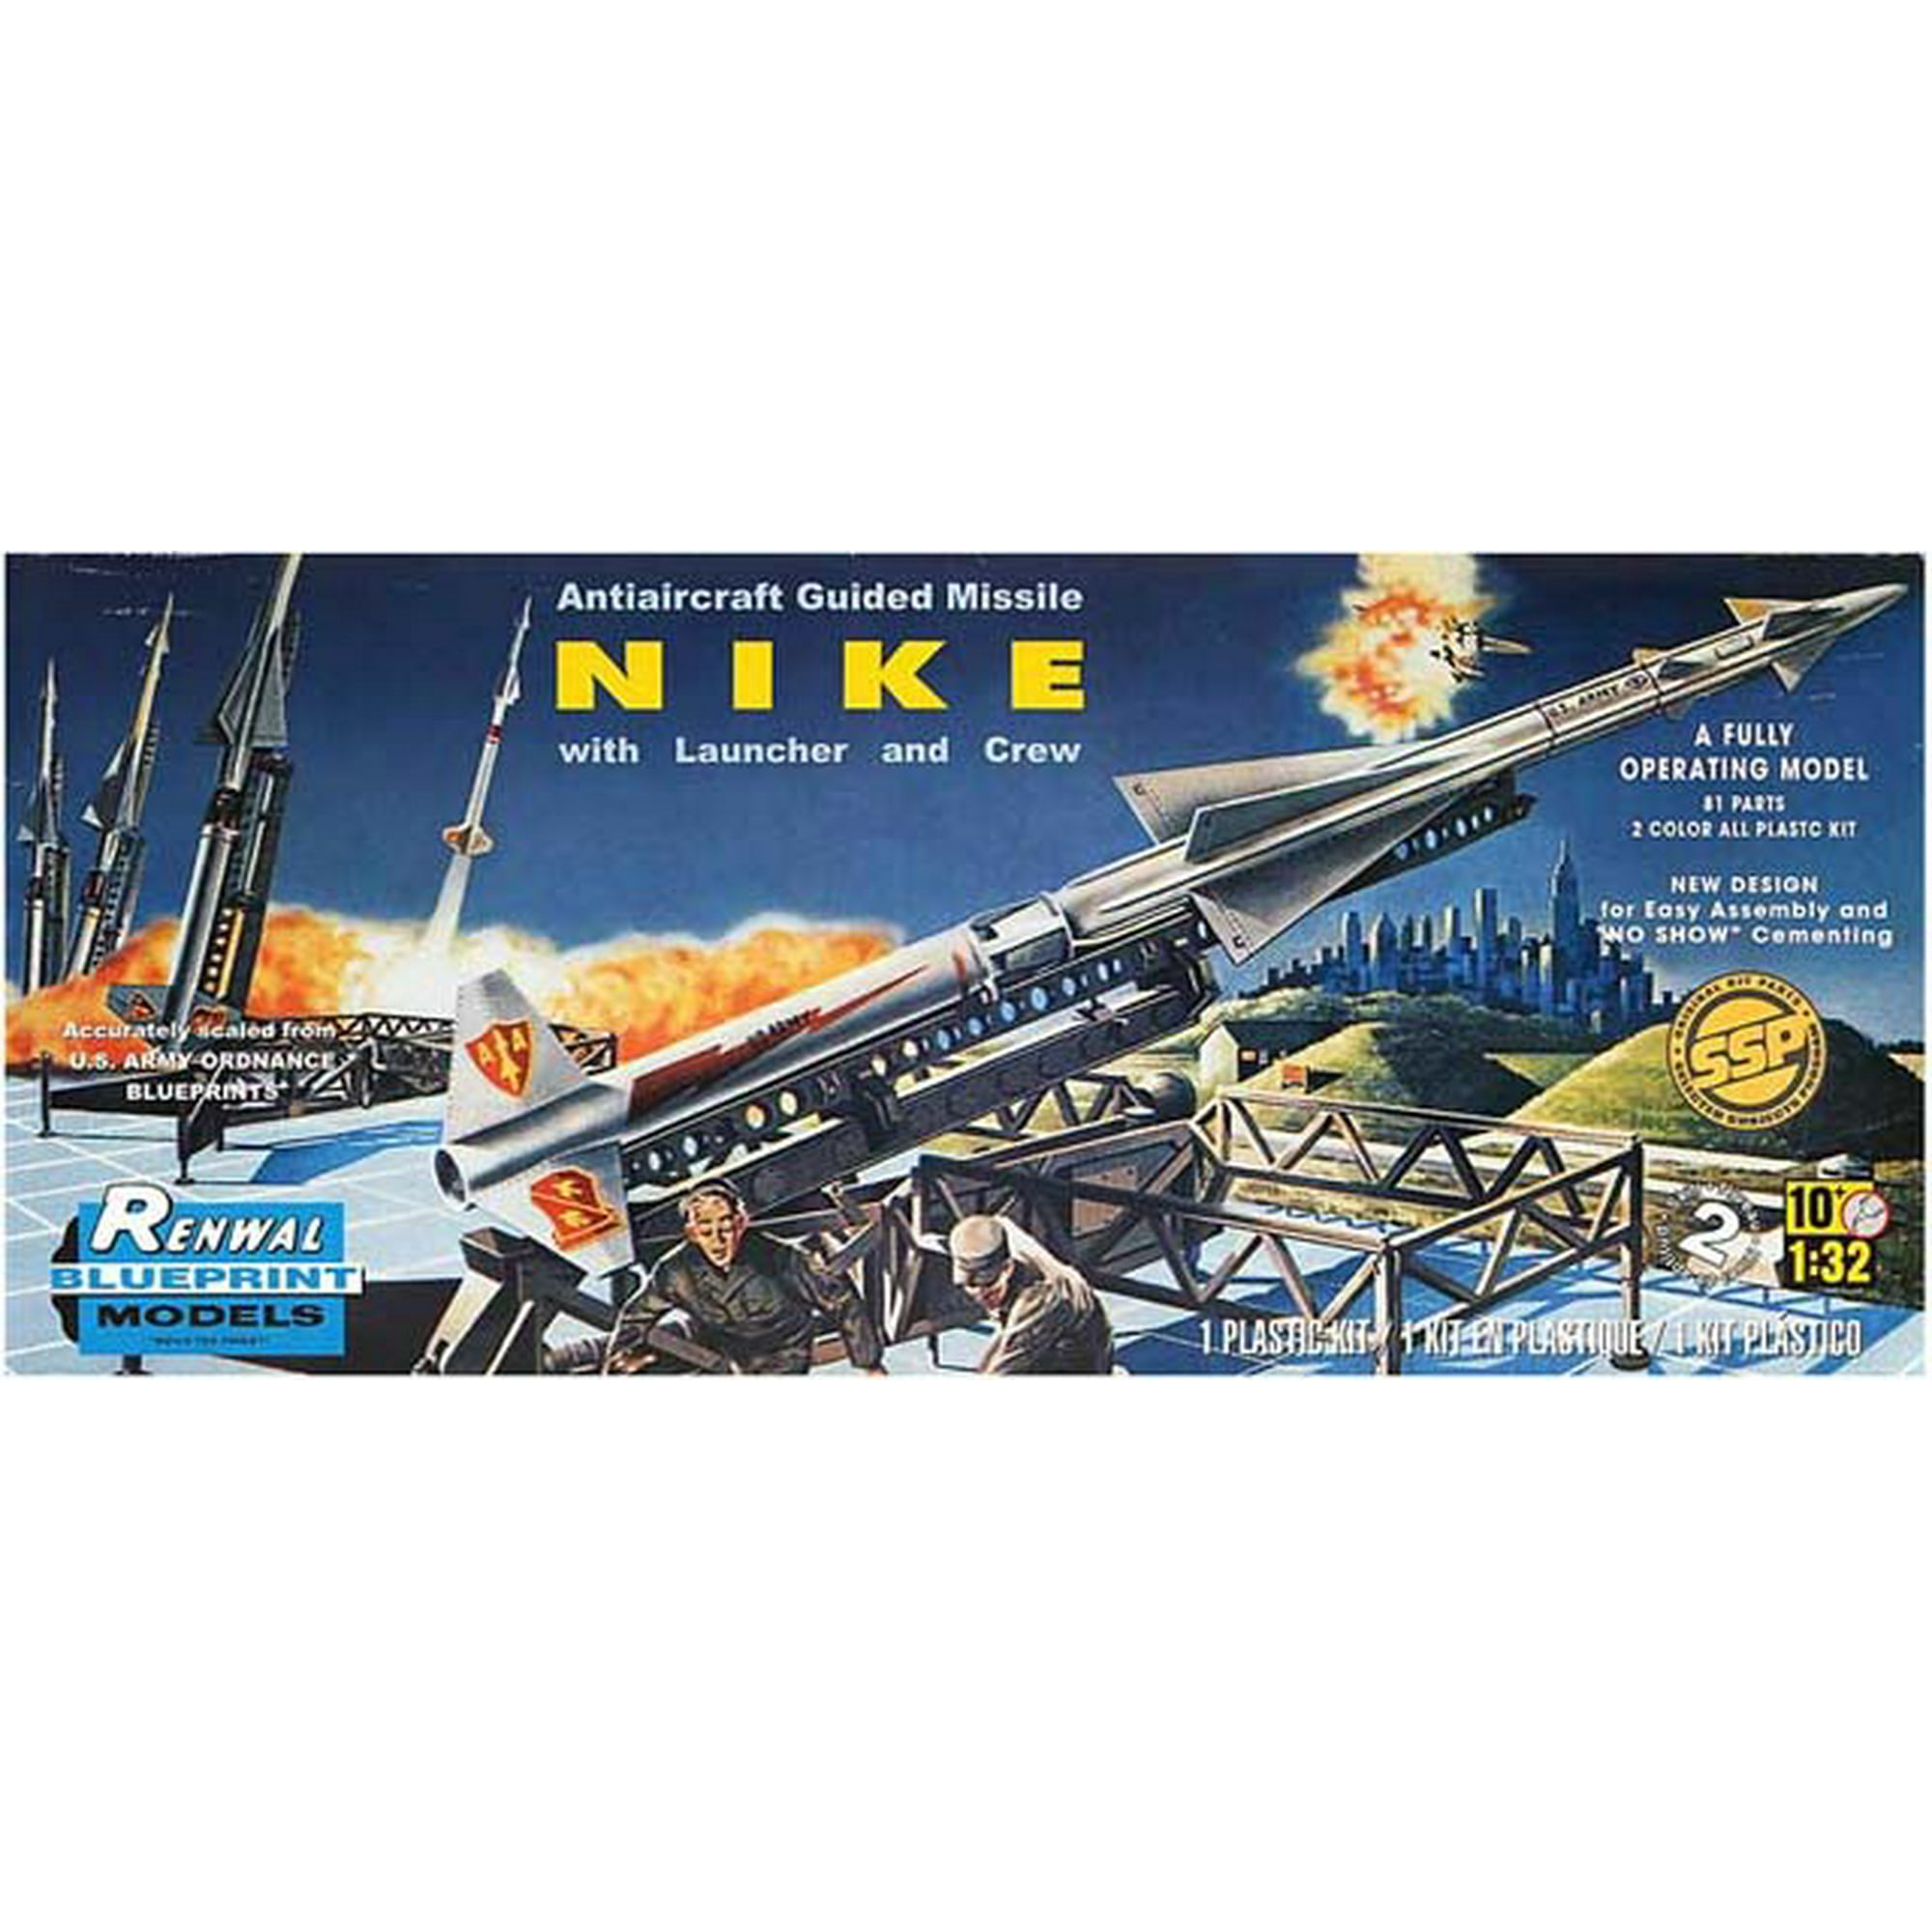 Nike with Launcher and Crew (85-7815) 1:32 Scale Plastic Model Kit | Walmart Canada